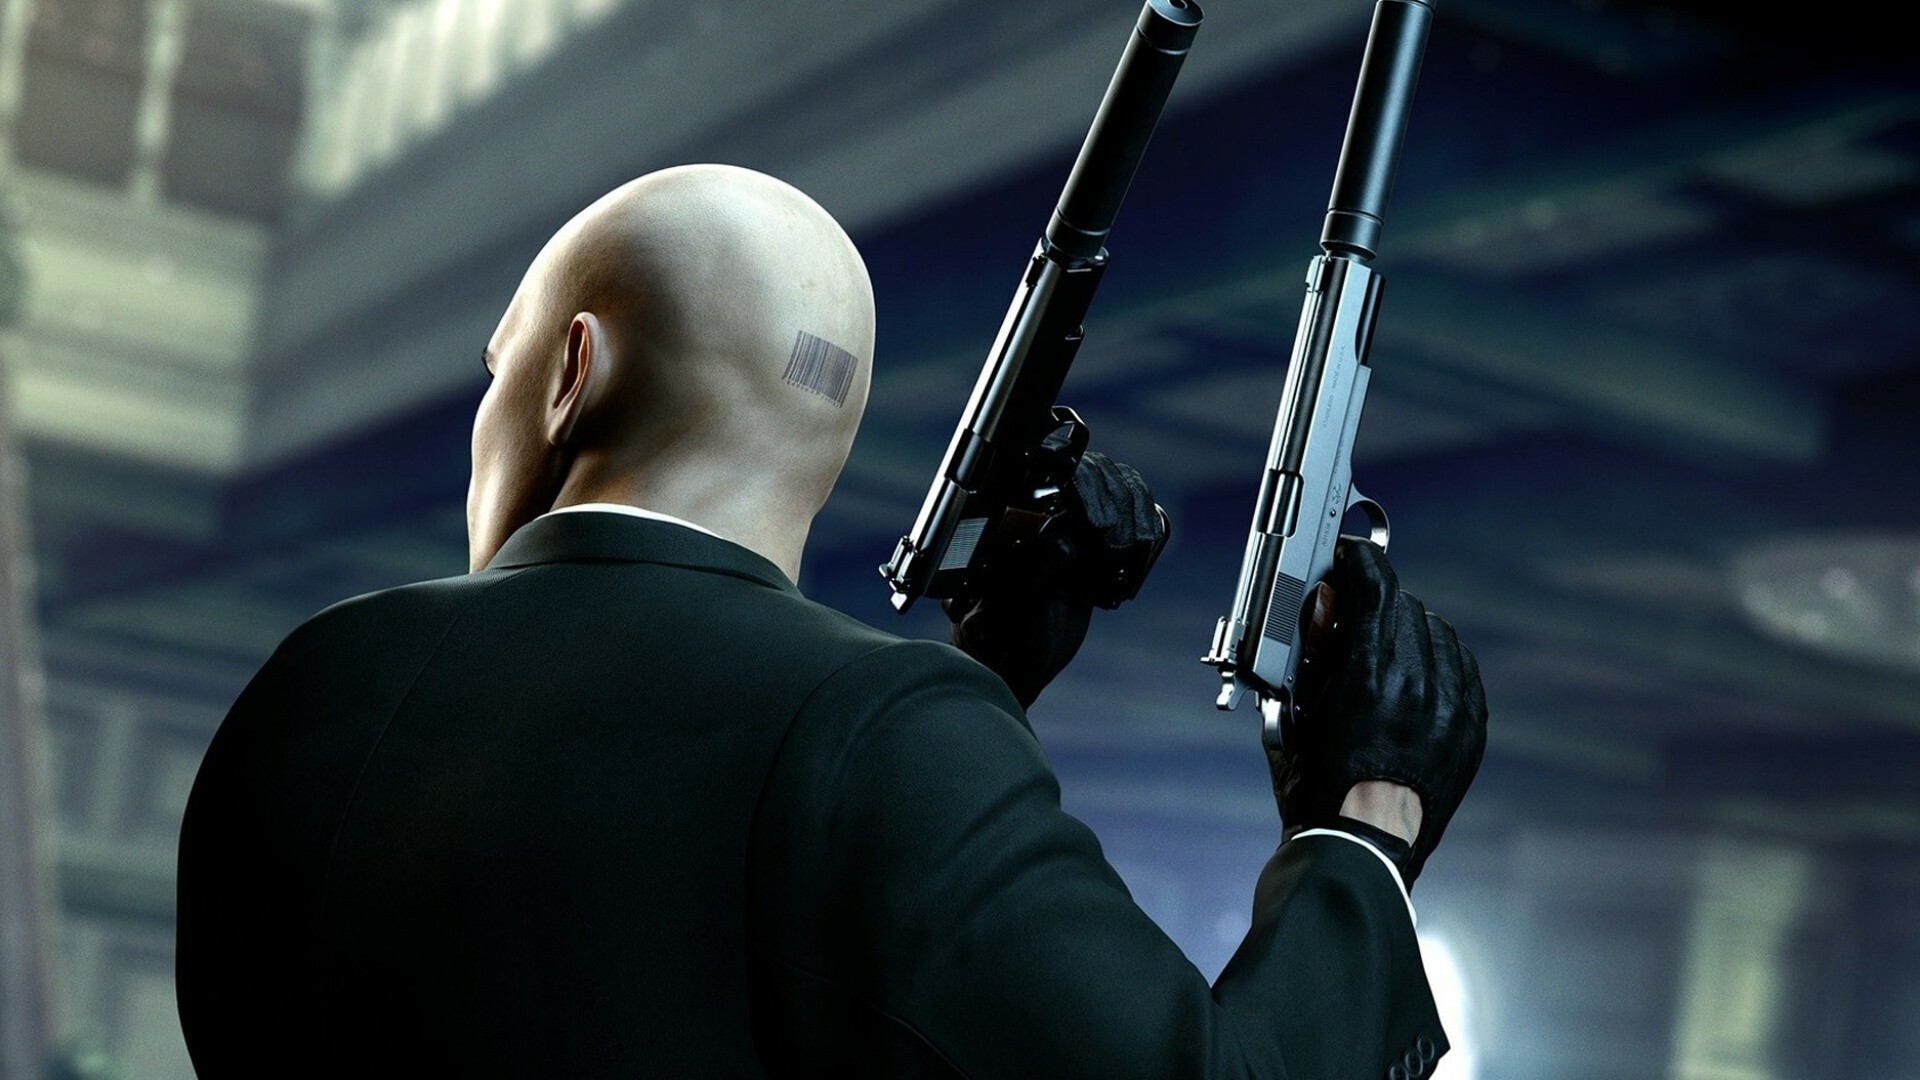 Hitman (Game): It won various awards including "PC Game of the Year" at the 2021 Golden Joystick Awards. 1920x1080 Full HD Wallpaper.